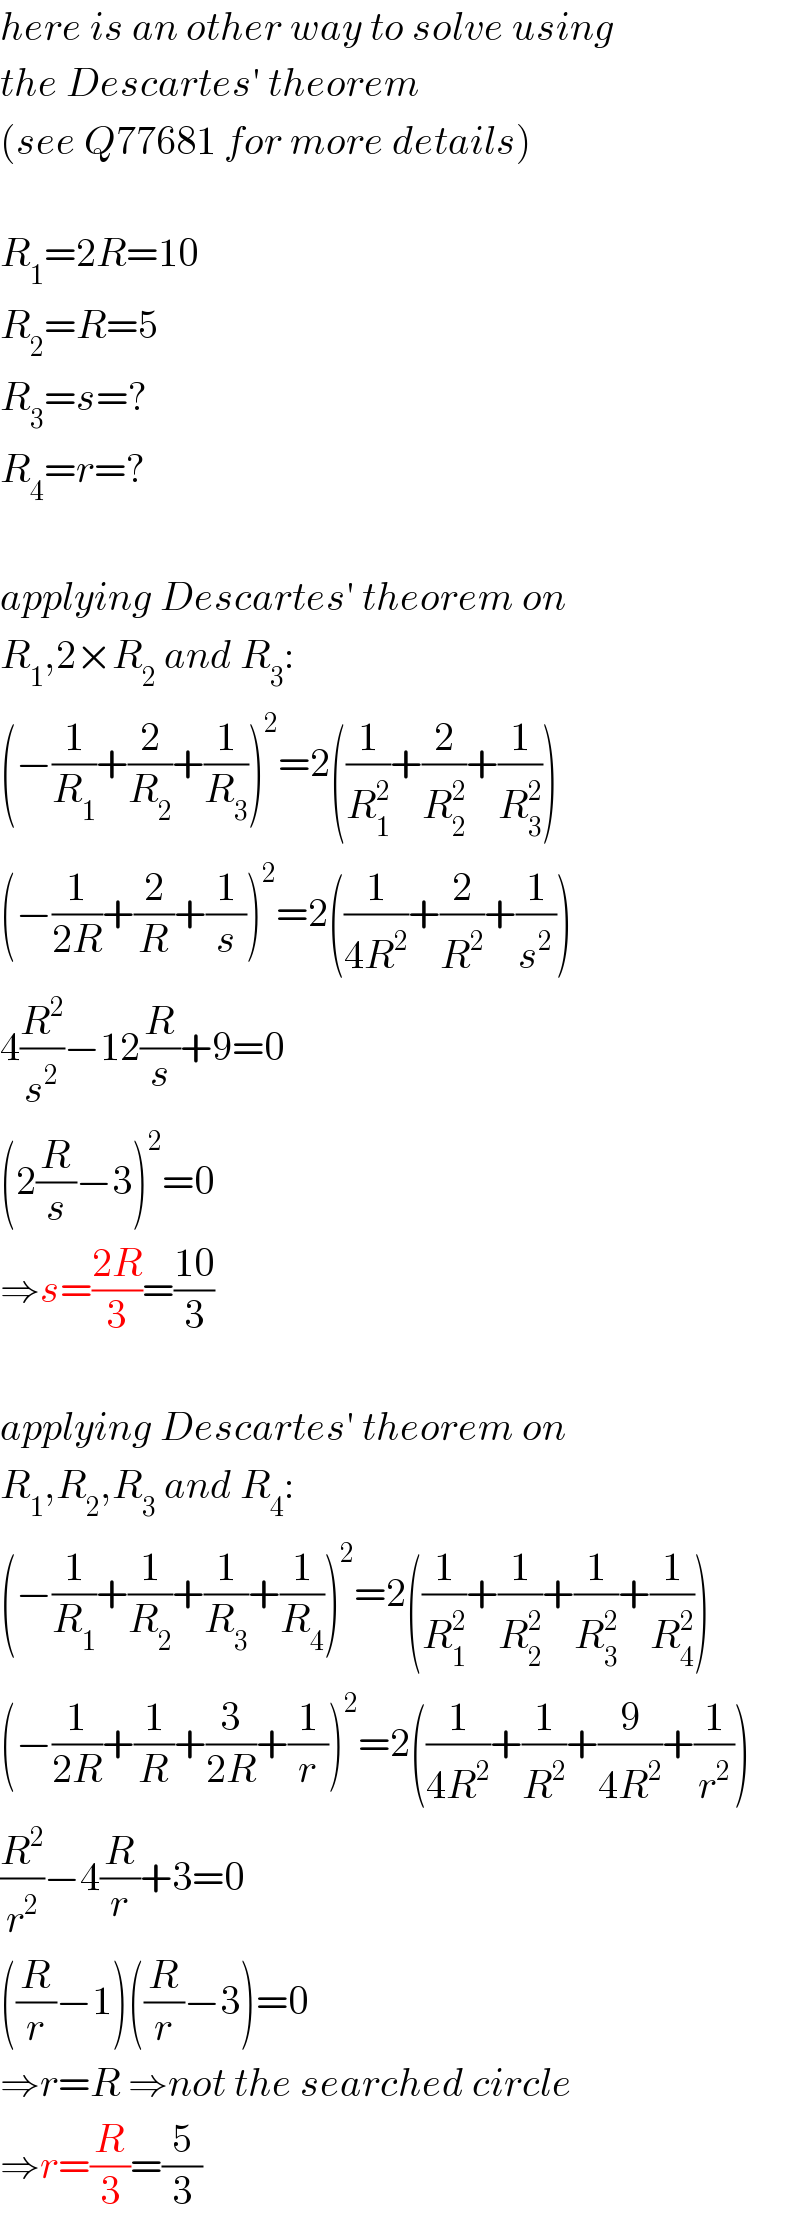 here is an other way to solve using  the Descartes′ theorem  (see Q77681 for more details)    R_1 =2R=10  R_2 =R=5  R_3 =s=?  R_4 =r=?    applying Descartes′ theorem on  R_1 ,2×R_2  and R_3 :  (−(1/R_1 )+(2/R_2 )+(1/R_3 ))^2 =2((1/R_1 ^2 )+(2/R_2 ^2 )+(1/R_3 ^2 ))  (−(1/(2R))+(2/R)+(1/s))^2 =2((1/(4R^2 ))+(2/R^2 )+(1/s^2 ))  4(R^2 /s^2 )−12(R/s)+9=0  (2(R/s)−3)^2 =0  ⇒s=((2R)/3)=((10)/3)    applying Descartes′ theorem on  R_1 ,R_2 ,R_3  and R_4 :  (−(1/R_1 )+(1/R_2 )+(1/R_3 )+(1/R_4 ))^2 =2((1/R_1 ^2 )+(1/R_2 ^2 )+(1/R_3 ^2 )+(1/R_4 ^2 ))  (−(1/(2R))+(1/R)+(3/(2R))+(1/r))^2 =2((1/(4R^2 ))+(1/R^2 )+(9/(4R^2 ))+(1/r^2 ))  (R^2 /r^2 )−4(R/r)+3=0  ((R/r)−1)((R/r)−3)=0  ⇒r=R ⇒not the searched circle  ⇒r=(R/3)=(5/3)  